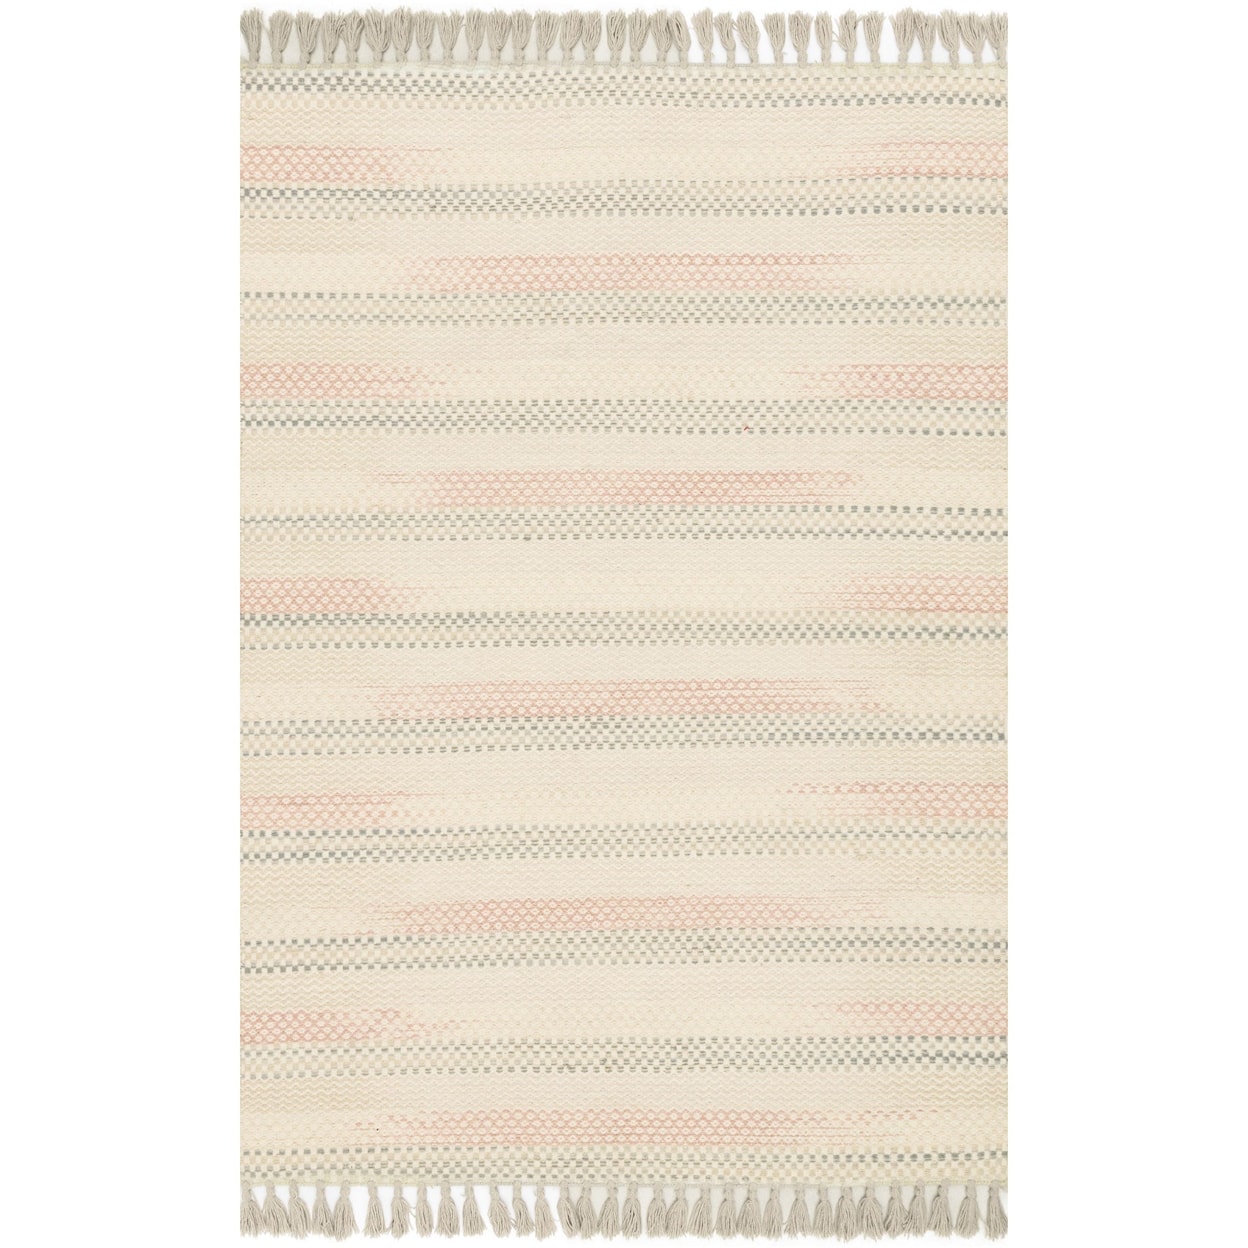 Magnolia Home by Joanna Gaines for Loloi Chantilly 9' 3" X 13' Rectangle Rug